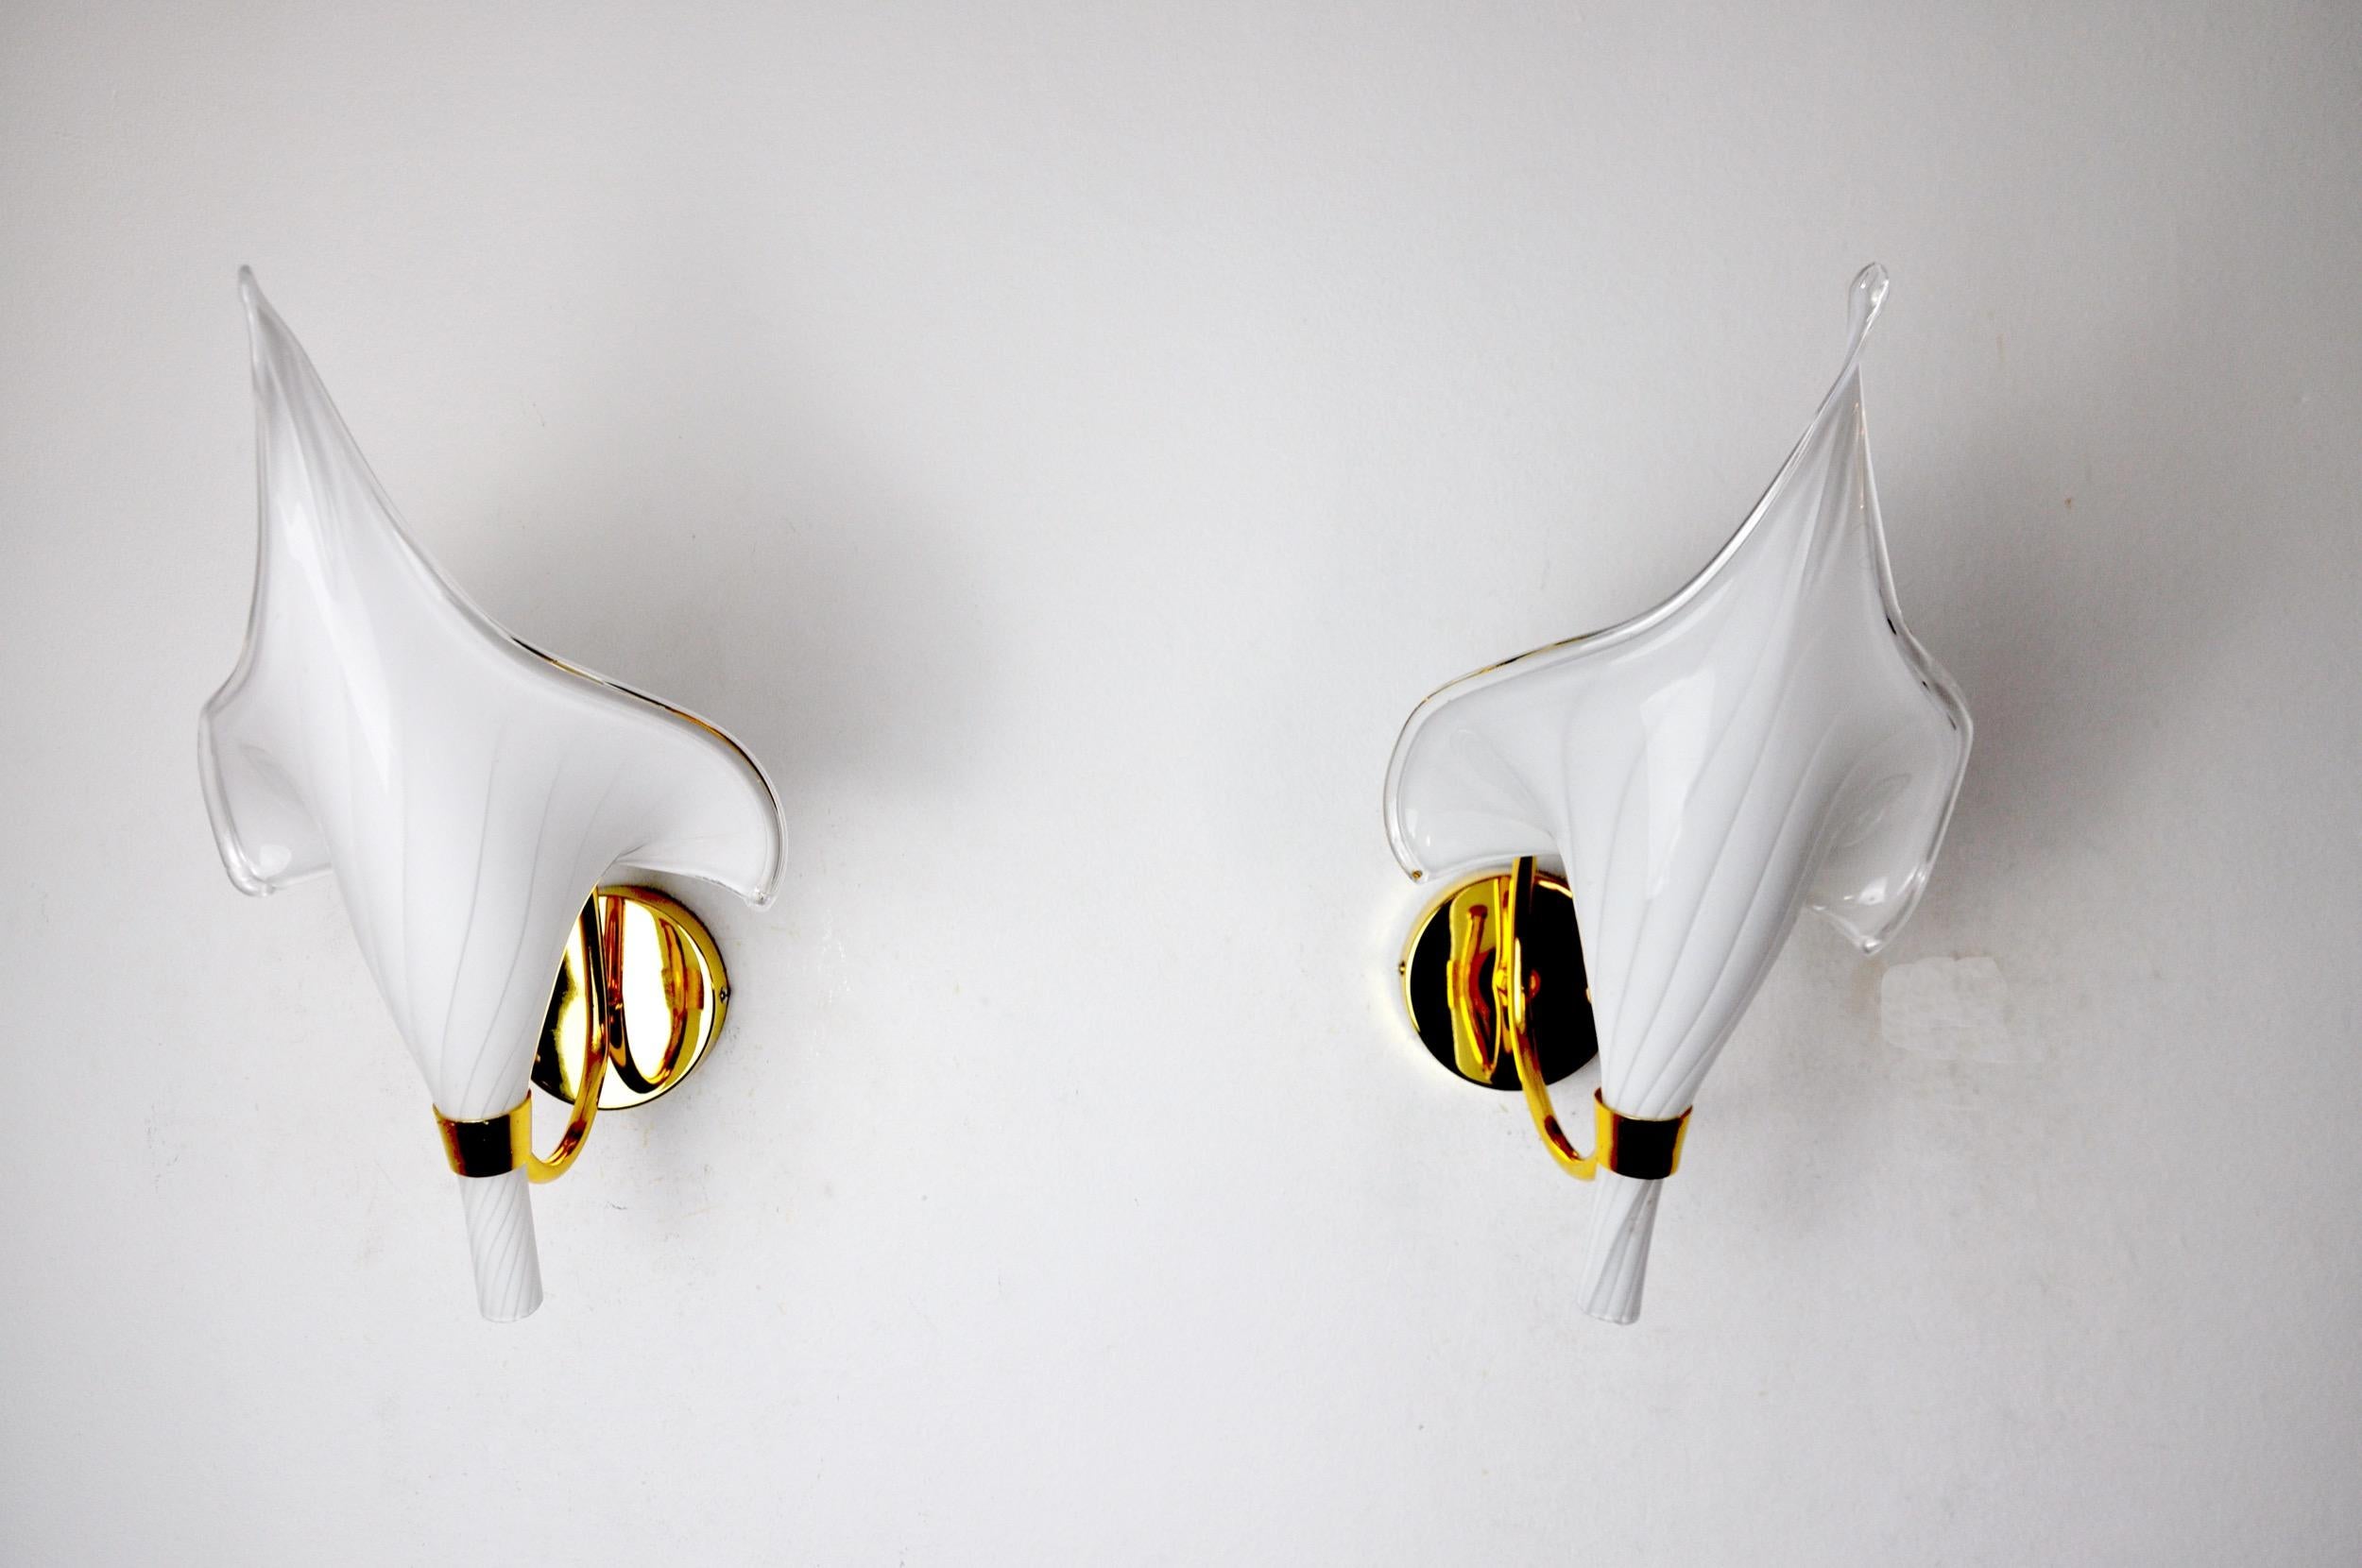 Hollywood Regency Pair of White Calla Lily Sconces, Murano Glass, Italy, 1970 For Sale